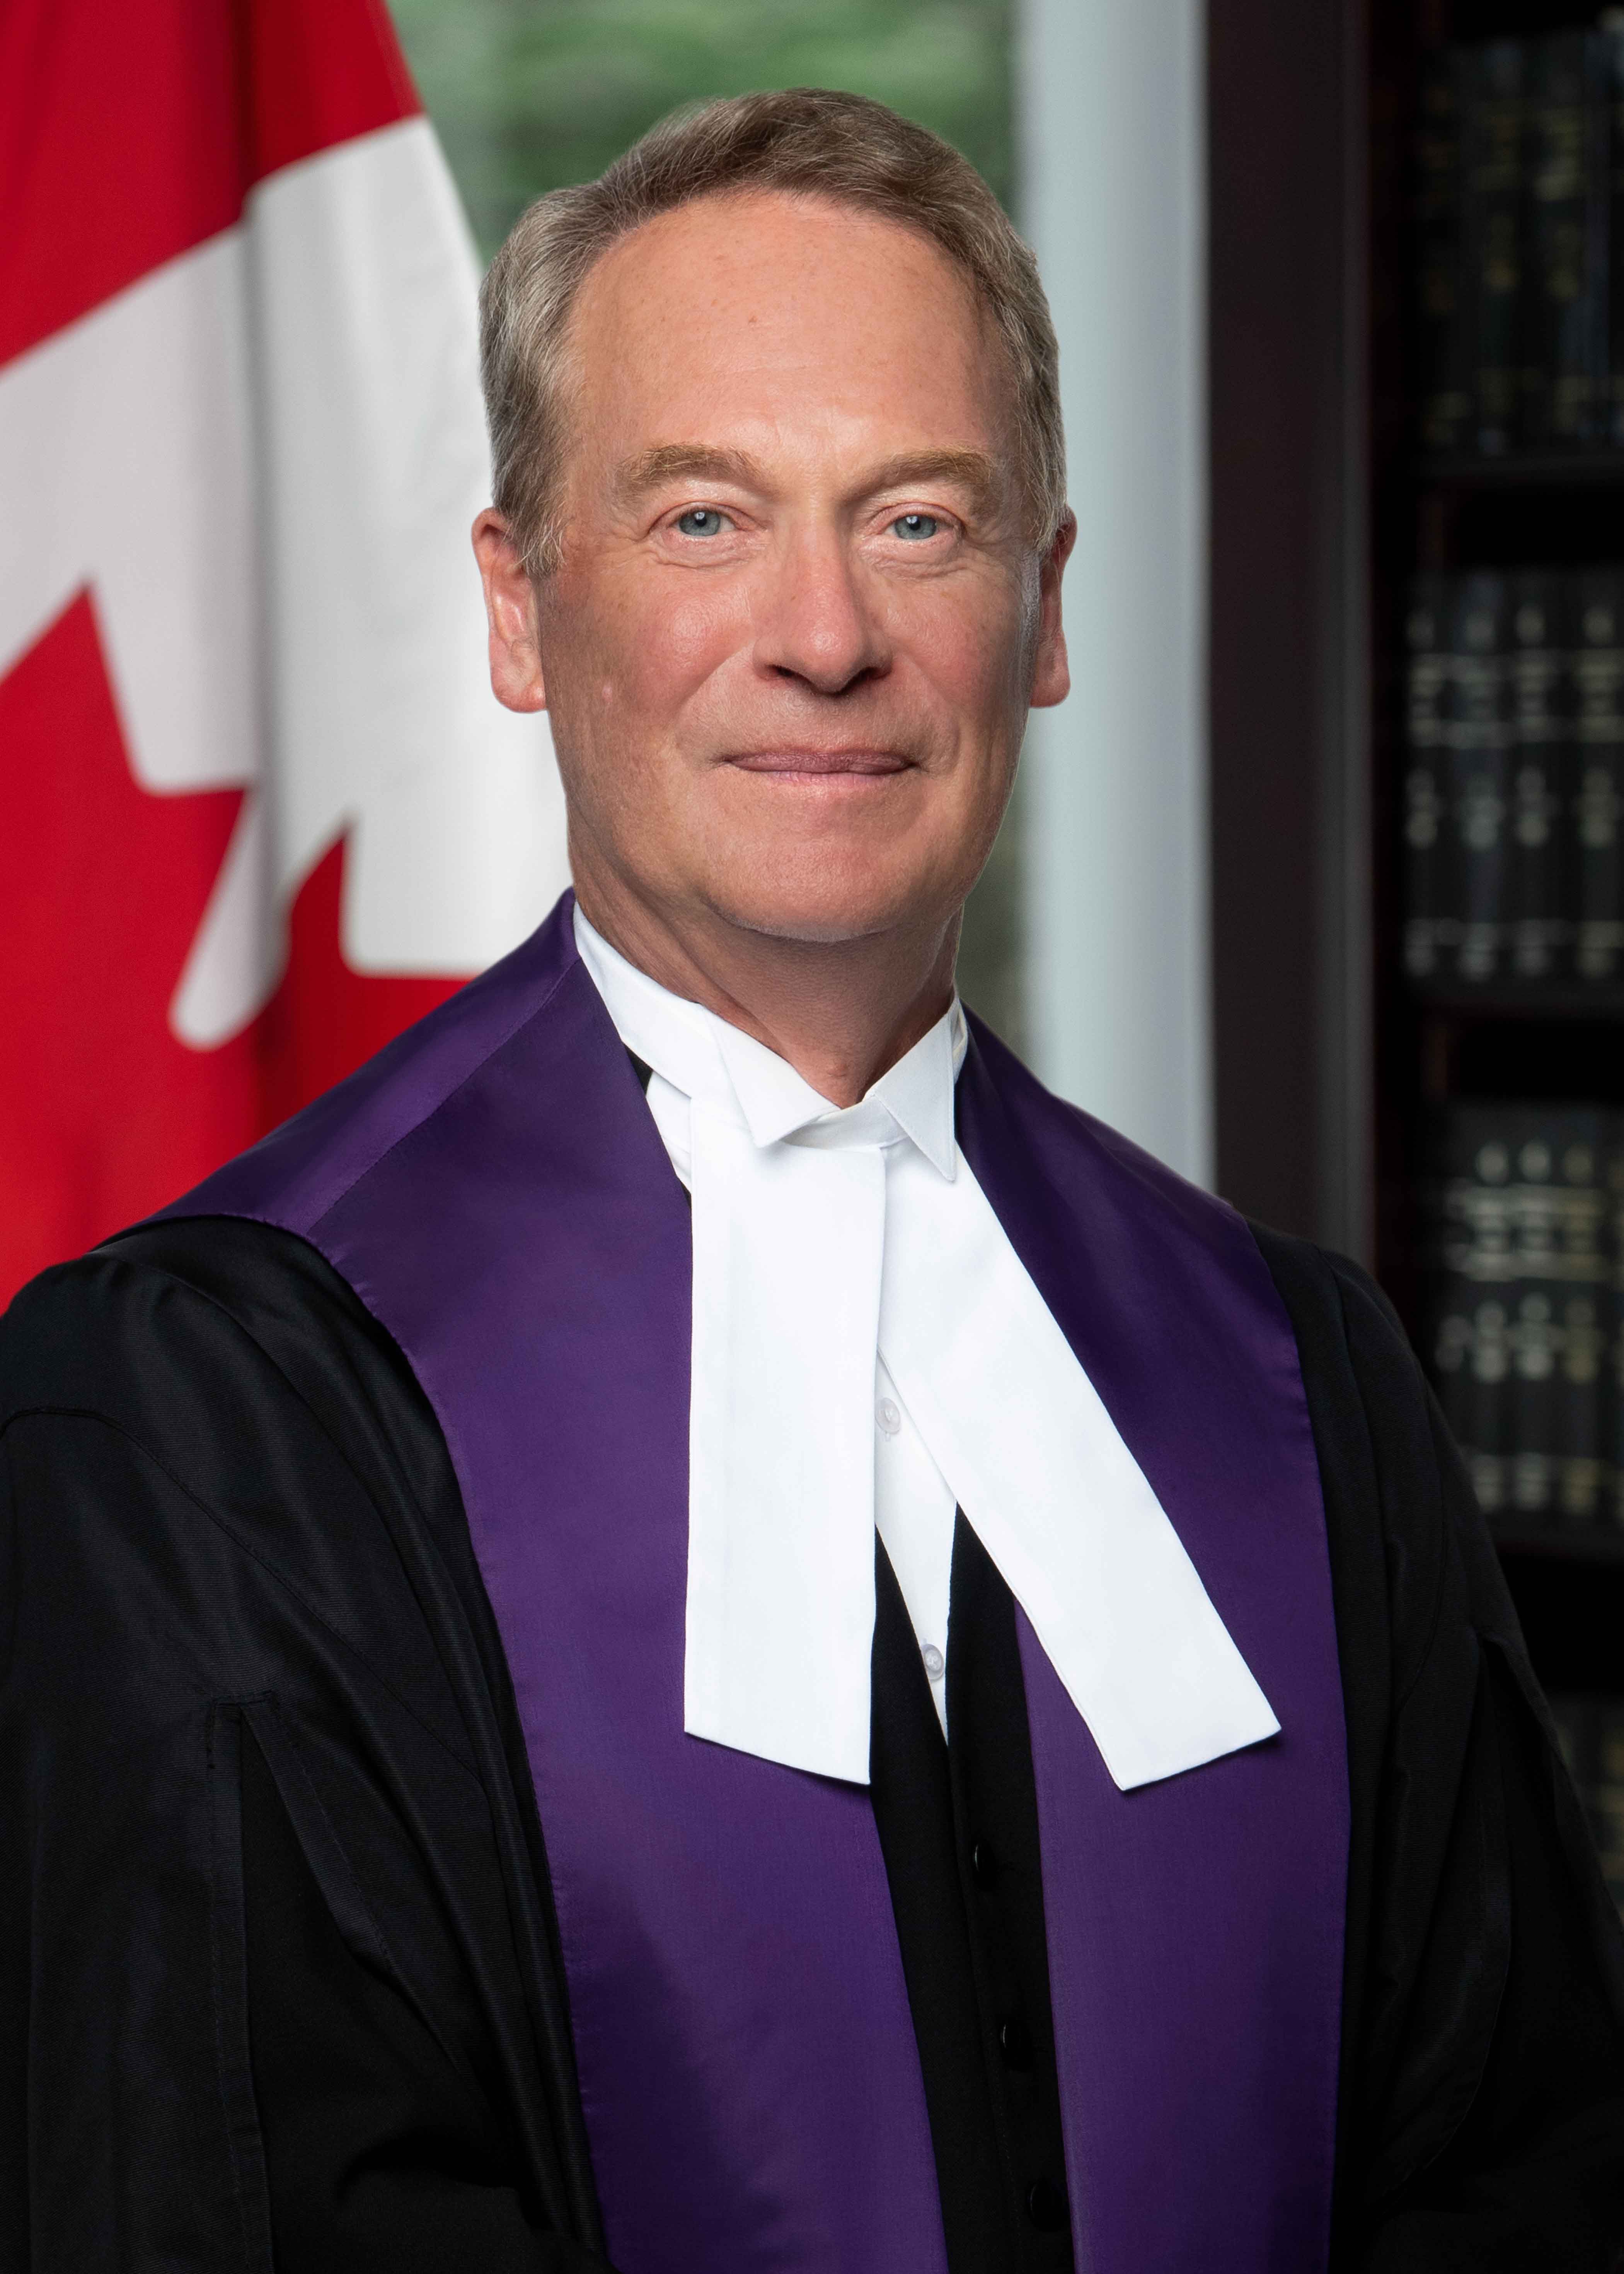 image: The Honourable Bruce Russell